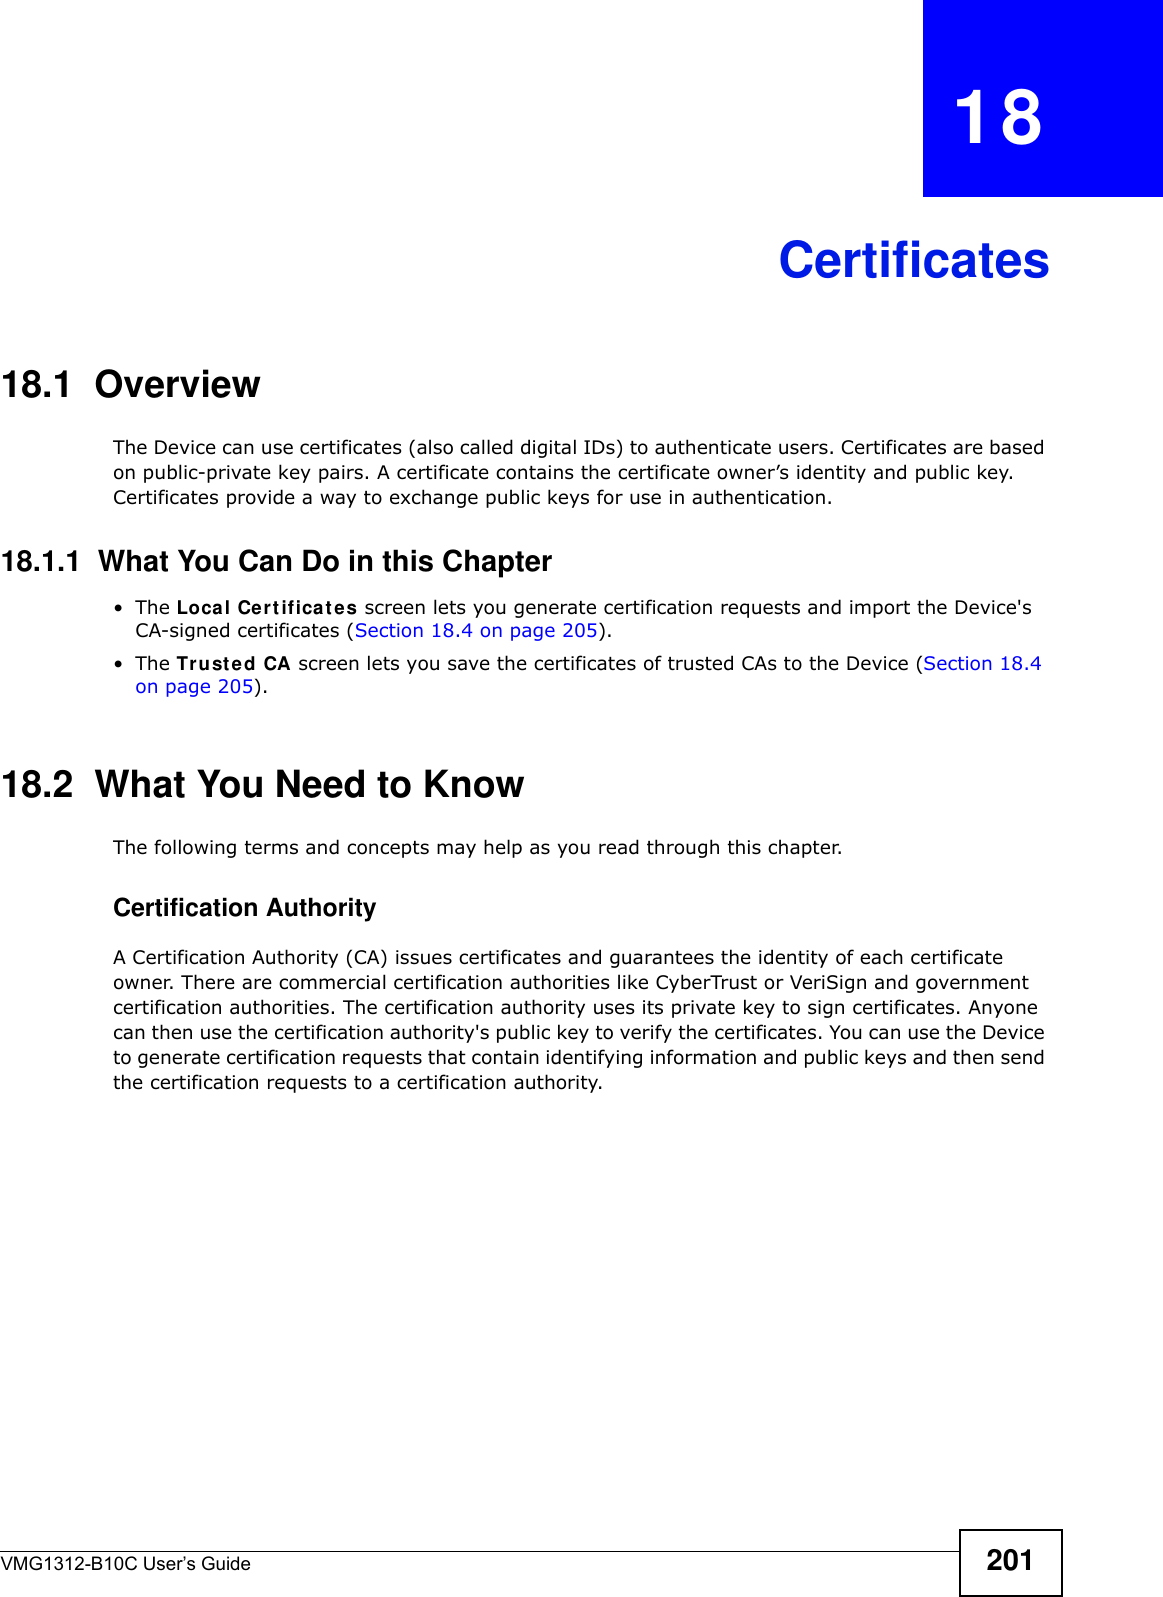 VMG1312-B10C User’s Guide 201CHAPTER   18Certificates18.1  OverviewThe Device can use certificates (also called digital IDs) to authenticate users. Certificates are based on public-private key pairs. A certificate contains the certificate owner’s identity and public key. Certificates provide a way to exchange public keys for use in authentication. 18.1.1  What You Can Do in this Chapter•The Local Ce r t ifica t e s screen lets you generate certification requests and import the Device&apos;s CA-signed certificates (Section 18.4 on page 205).•The Tr uste d CA screen lets you save the certificates of trusted CAs to the Device (Section 18.4 on page 205).18.2  What You Need to KnowThe following terms and concepts may help as you read through this chapter.Certification Authority A Certification Authority (CA) issues certificates and guarantees the identity of each certificate owner. There are commercial certification authorities like CyberTrust or VeriSign and government certification authorities. The certification authority uses its private key to sign certificates. Anyone can then use the certification authority&apos;s public key to verify the certificates. You can use the Device to generate certification requests that contain identifying information and public keys and then send the certification requests to a certification authority.